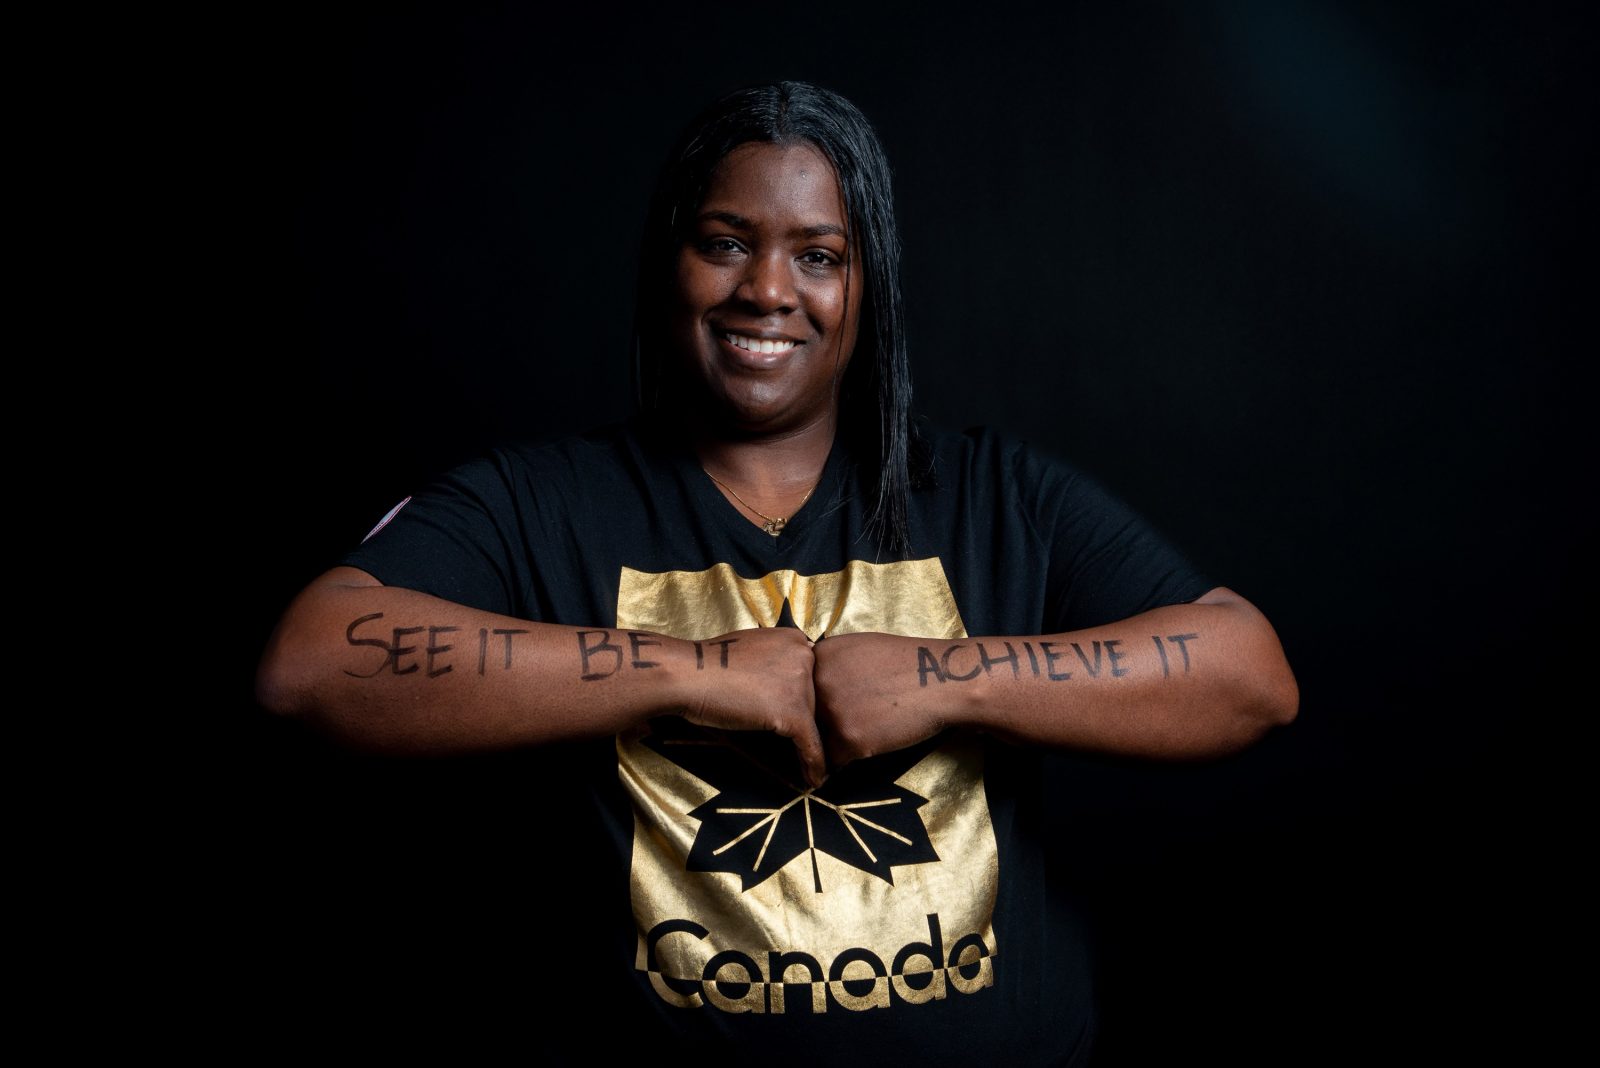 Shauna Bookal holds her arms in front of her chest, knuckles touching each other, to show the message written on her arms, “See it, be it, achieve it.”